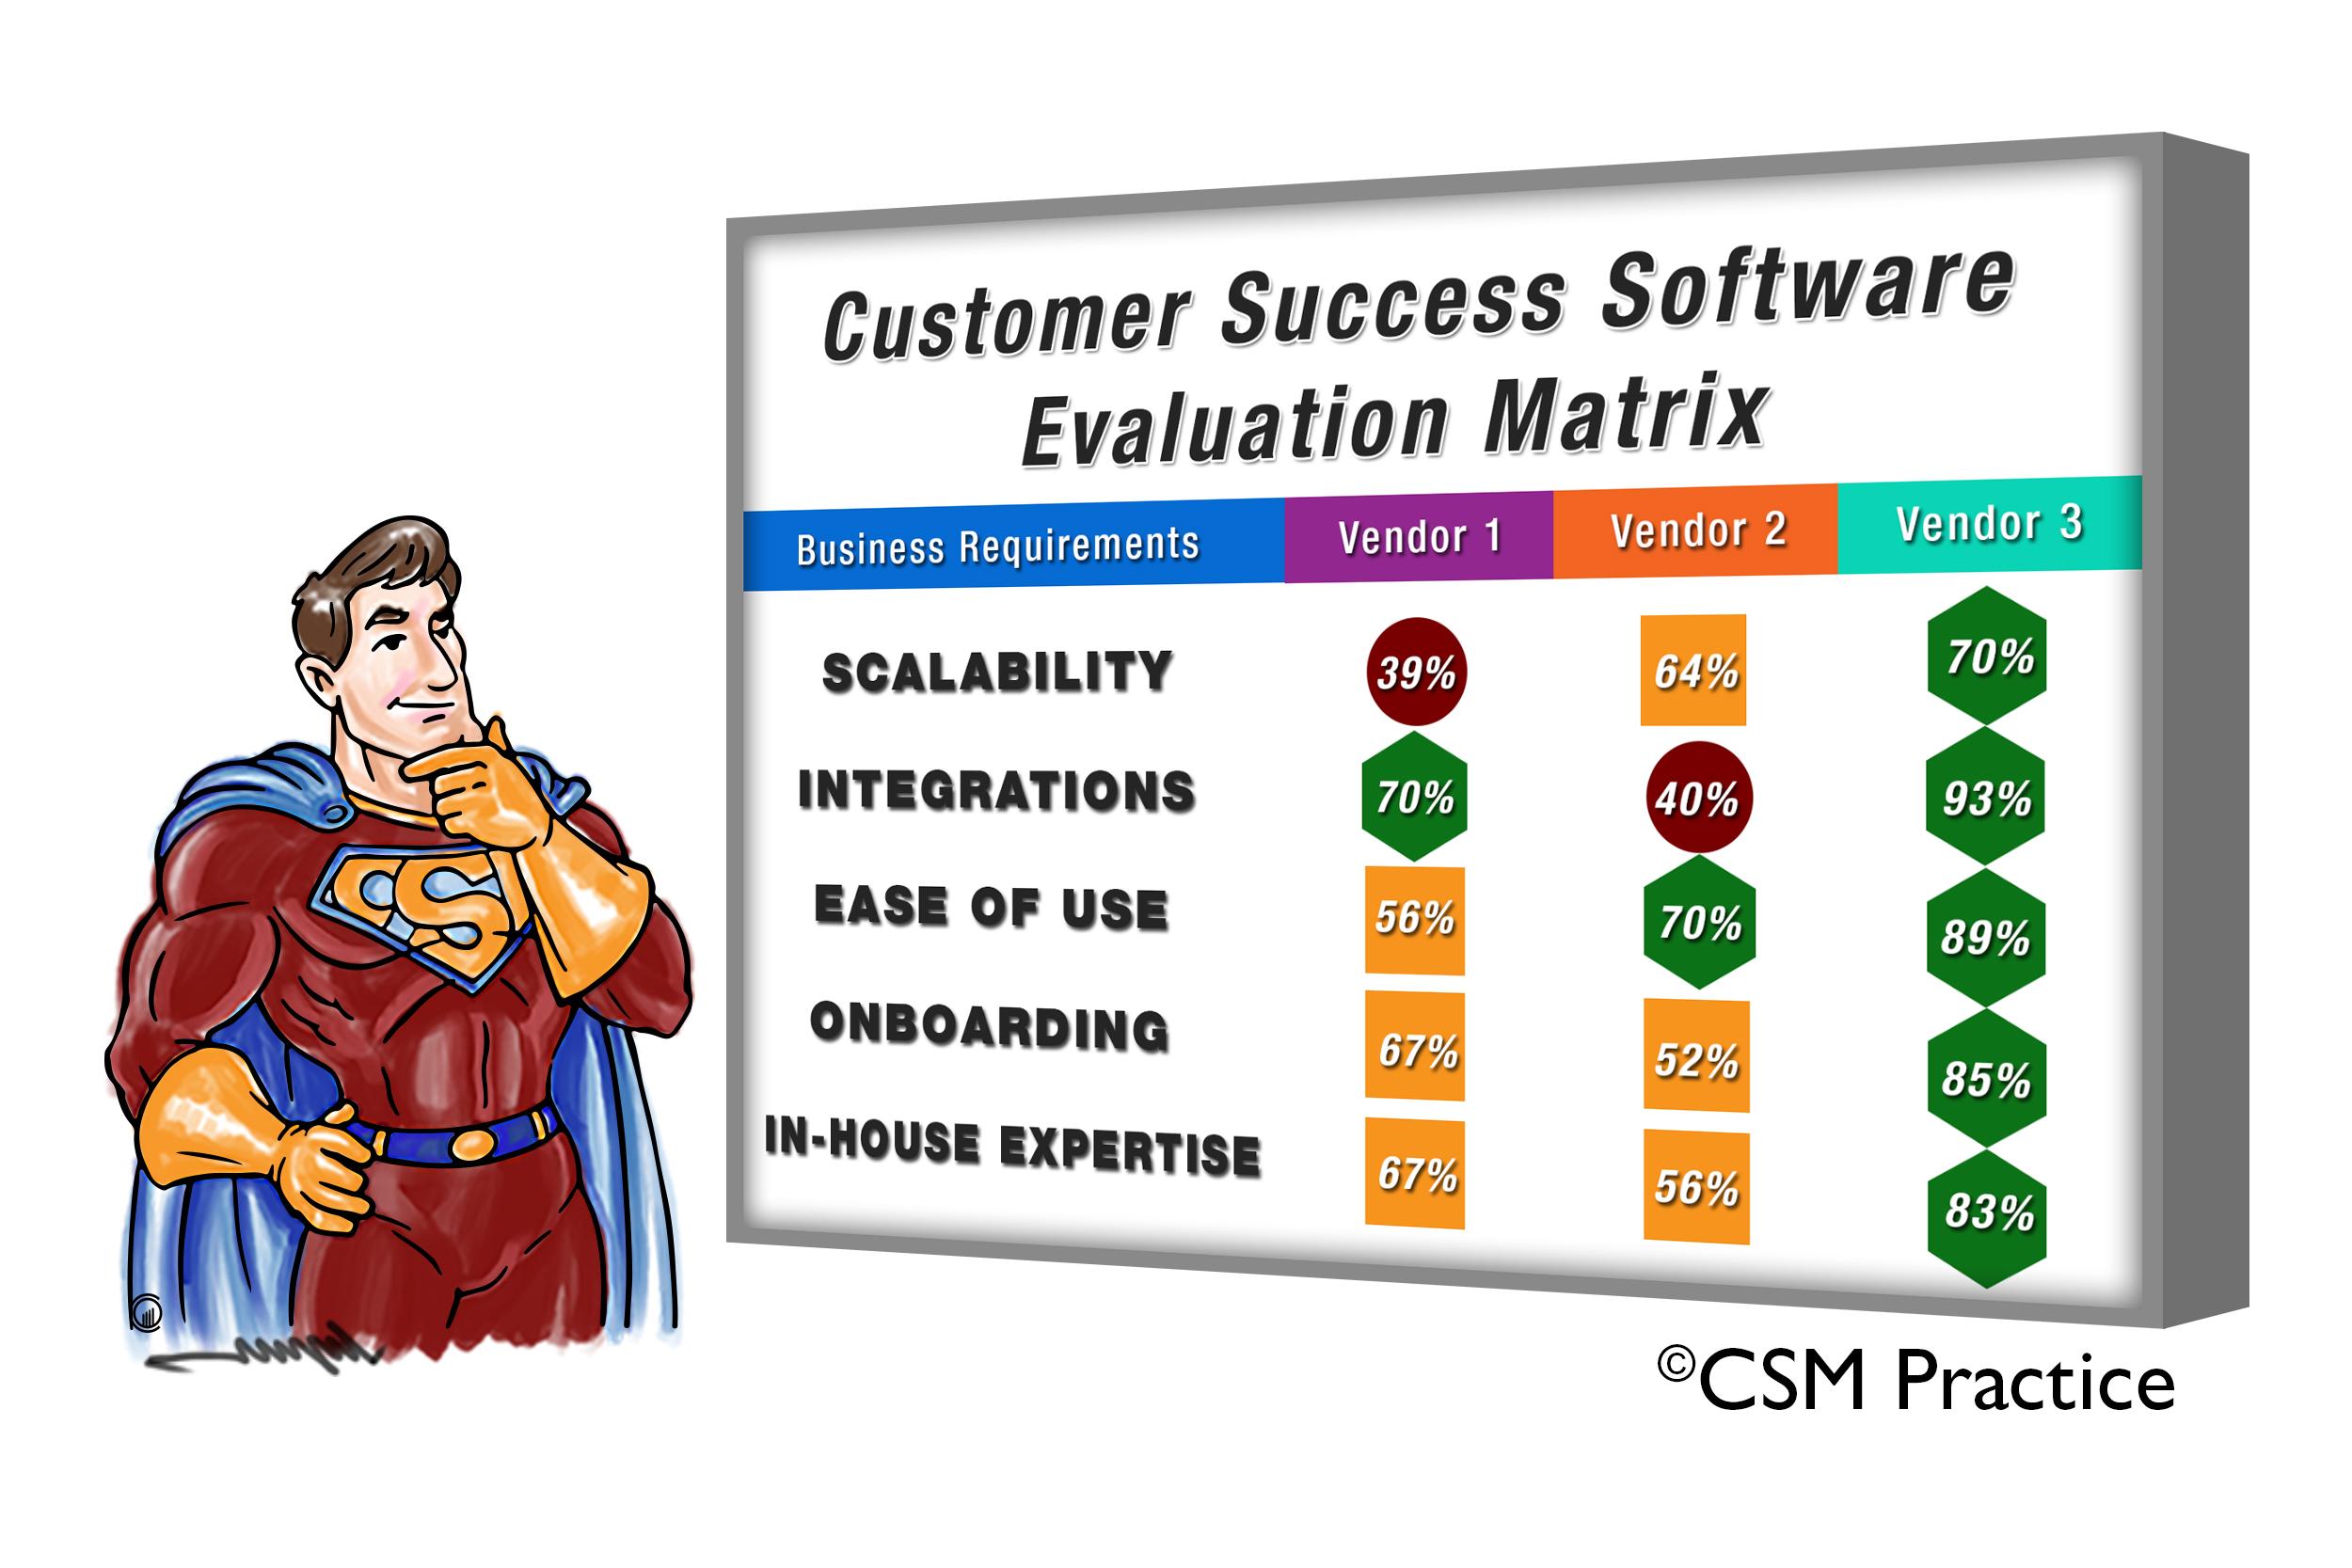 How to Implement Customer Success Software - CSM Practice